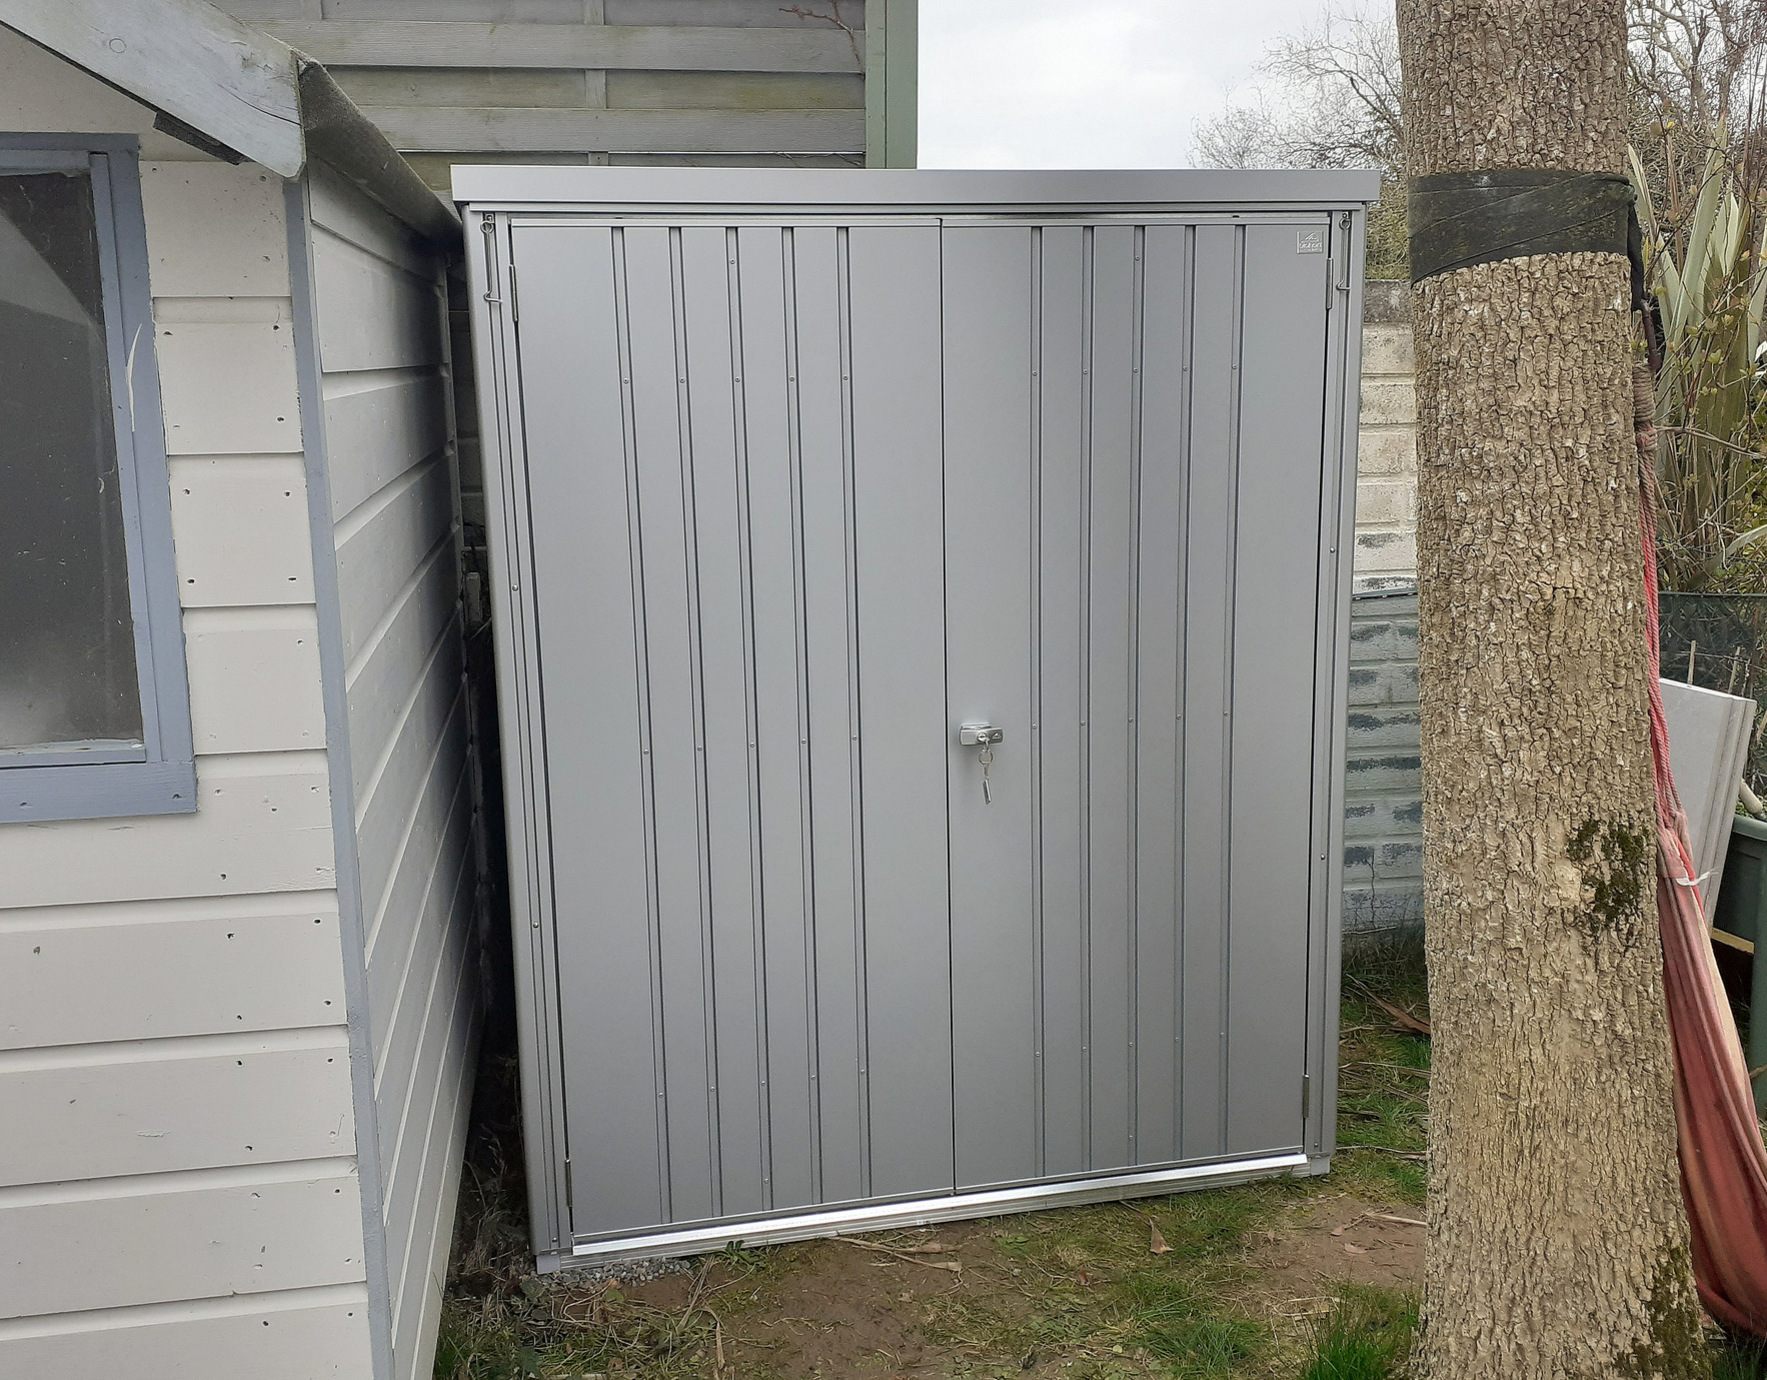 Biohort Equipment Locker 150 in metallic silver, supplied + fitted in Gorey, Co Wexford | Stylish, Versatile, Secure & Rainproof Patio Storage Solutions | FREE Fitting